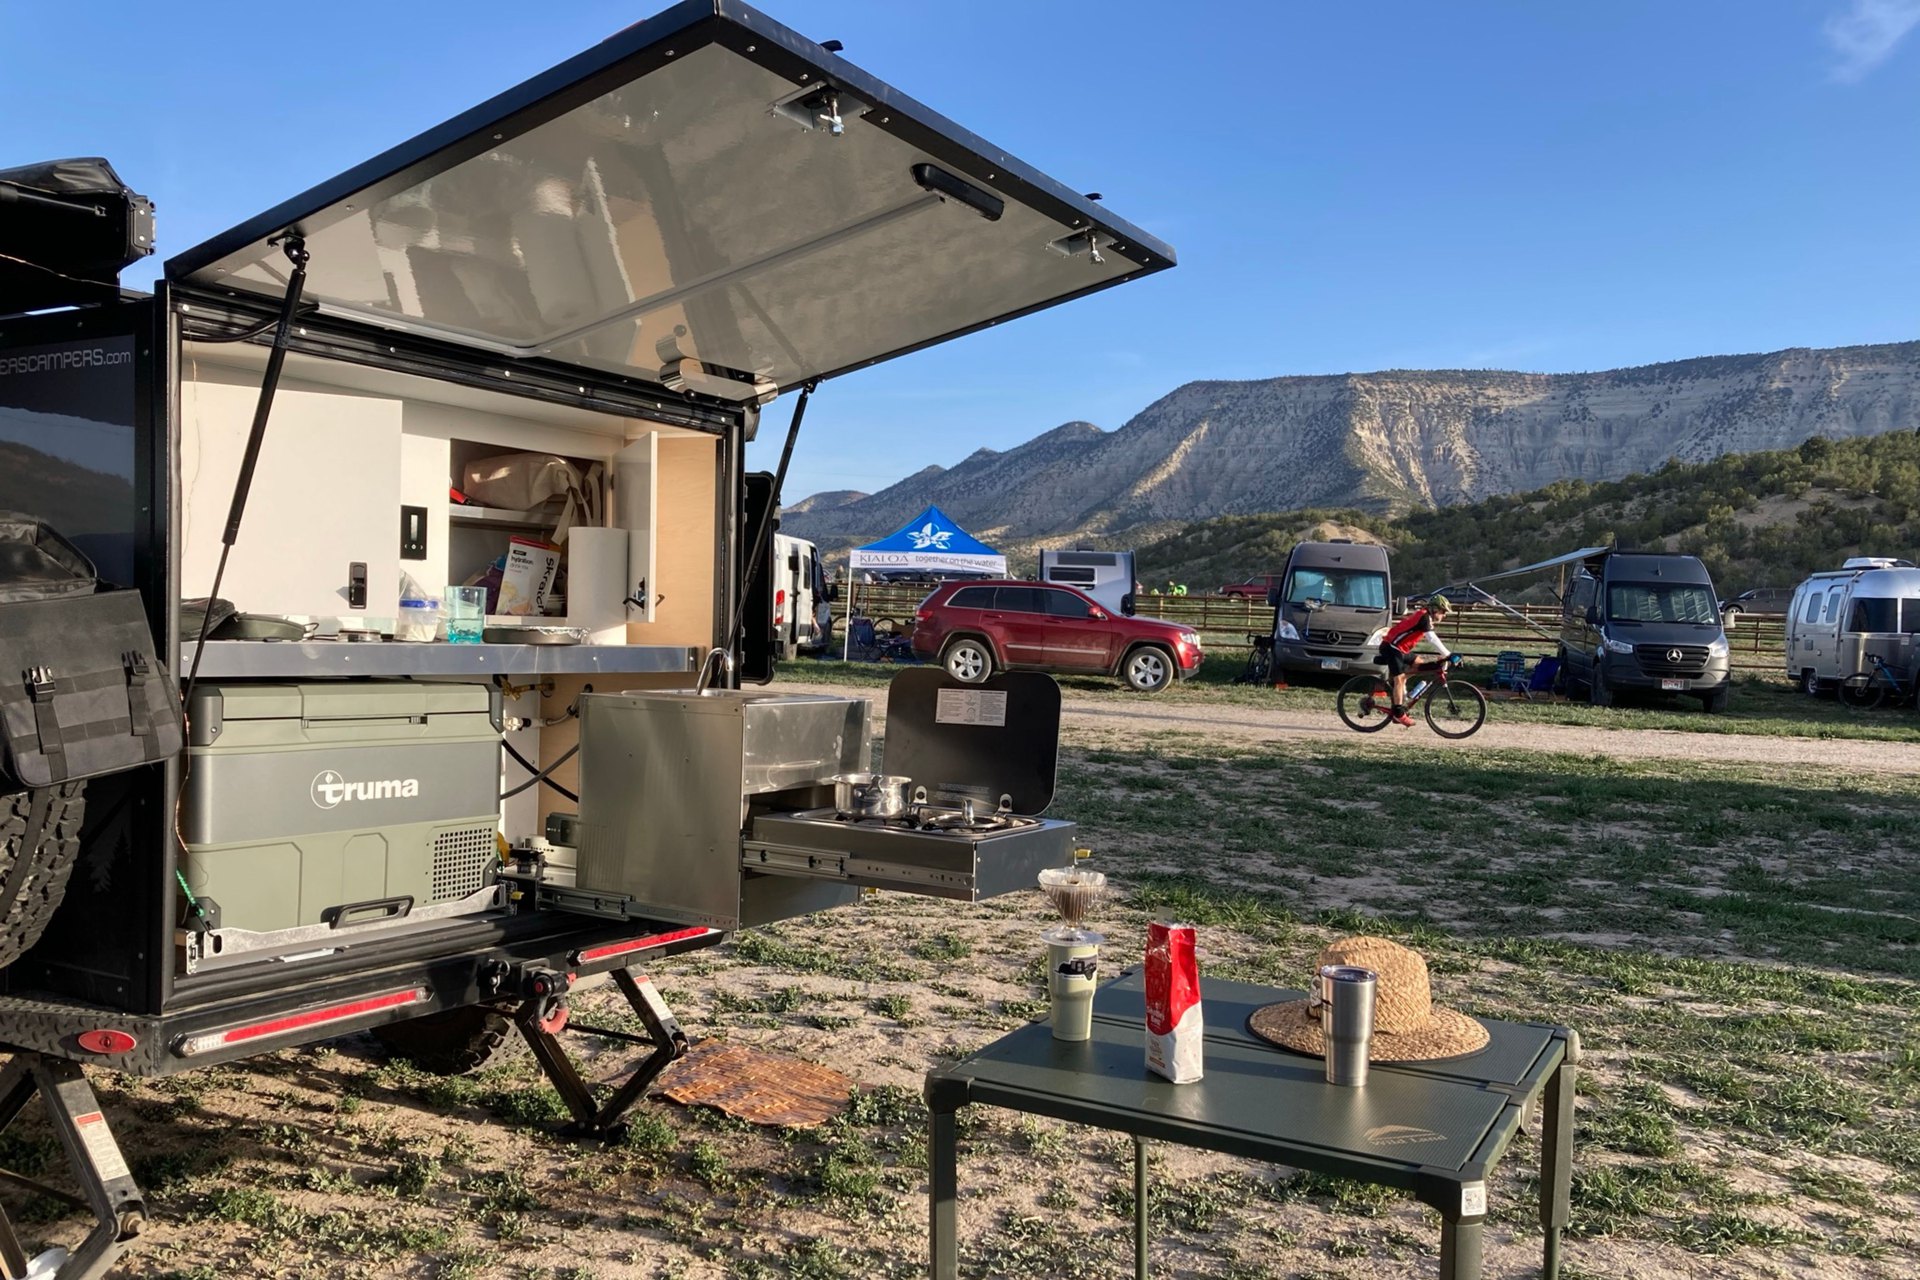 The XT is a great basecamp for Colorado Gravel Races